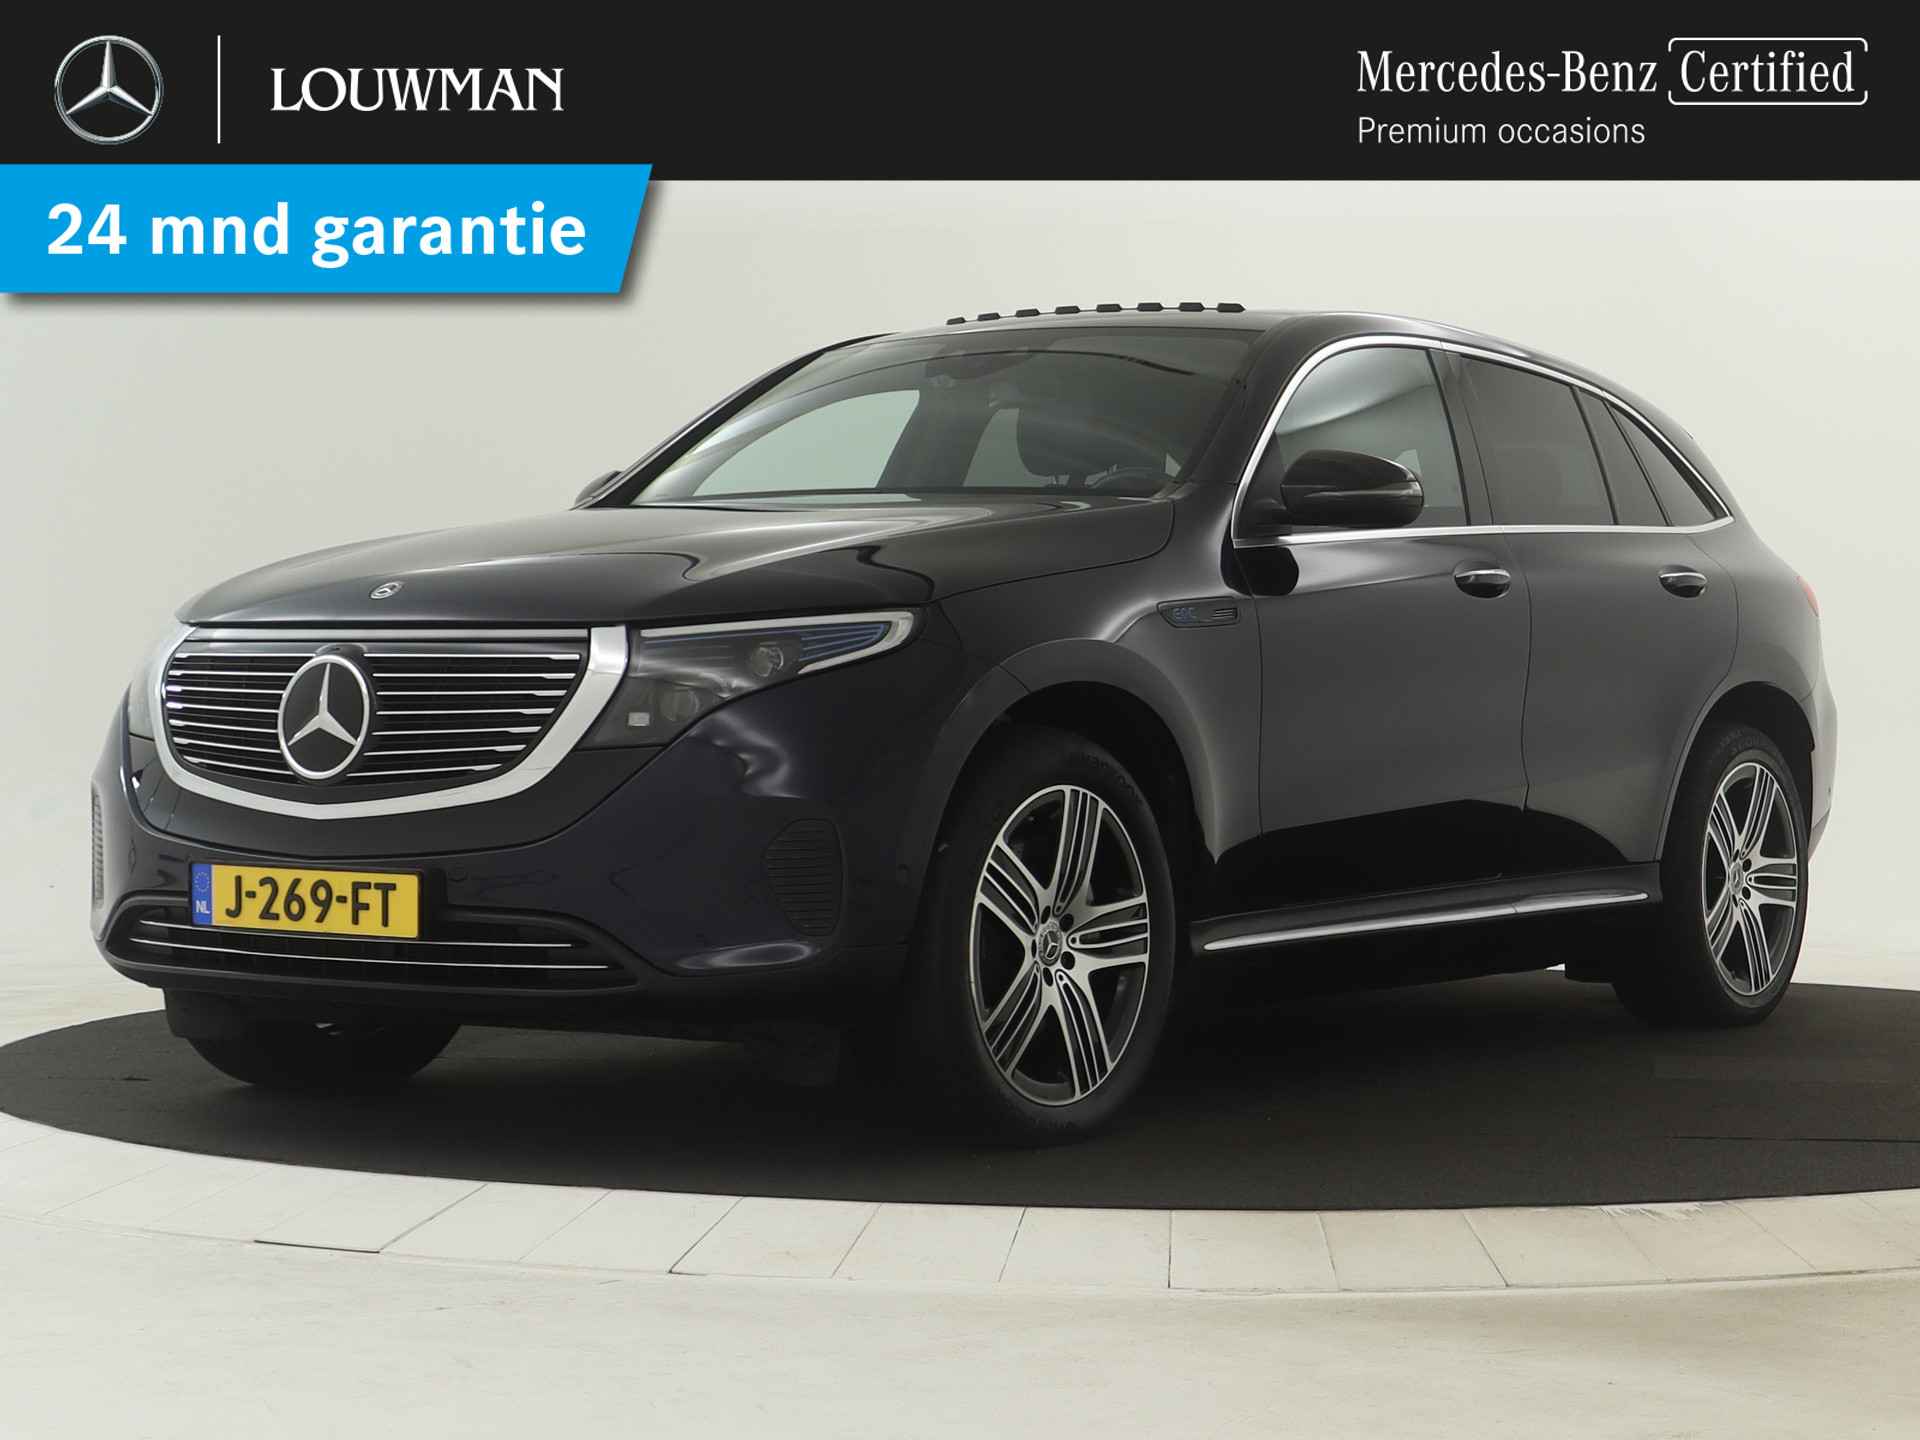 Mercedes-Benz EQC 400 4MATIC Business Solution Luxury 80 kWh